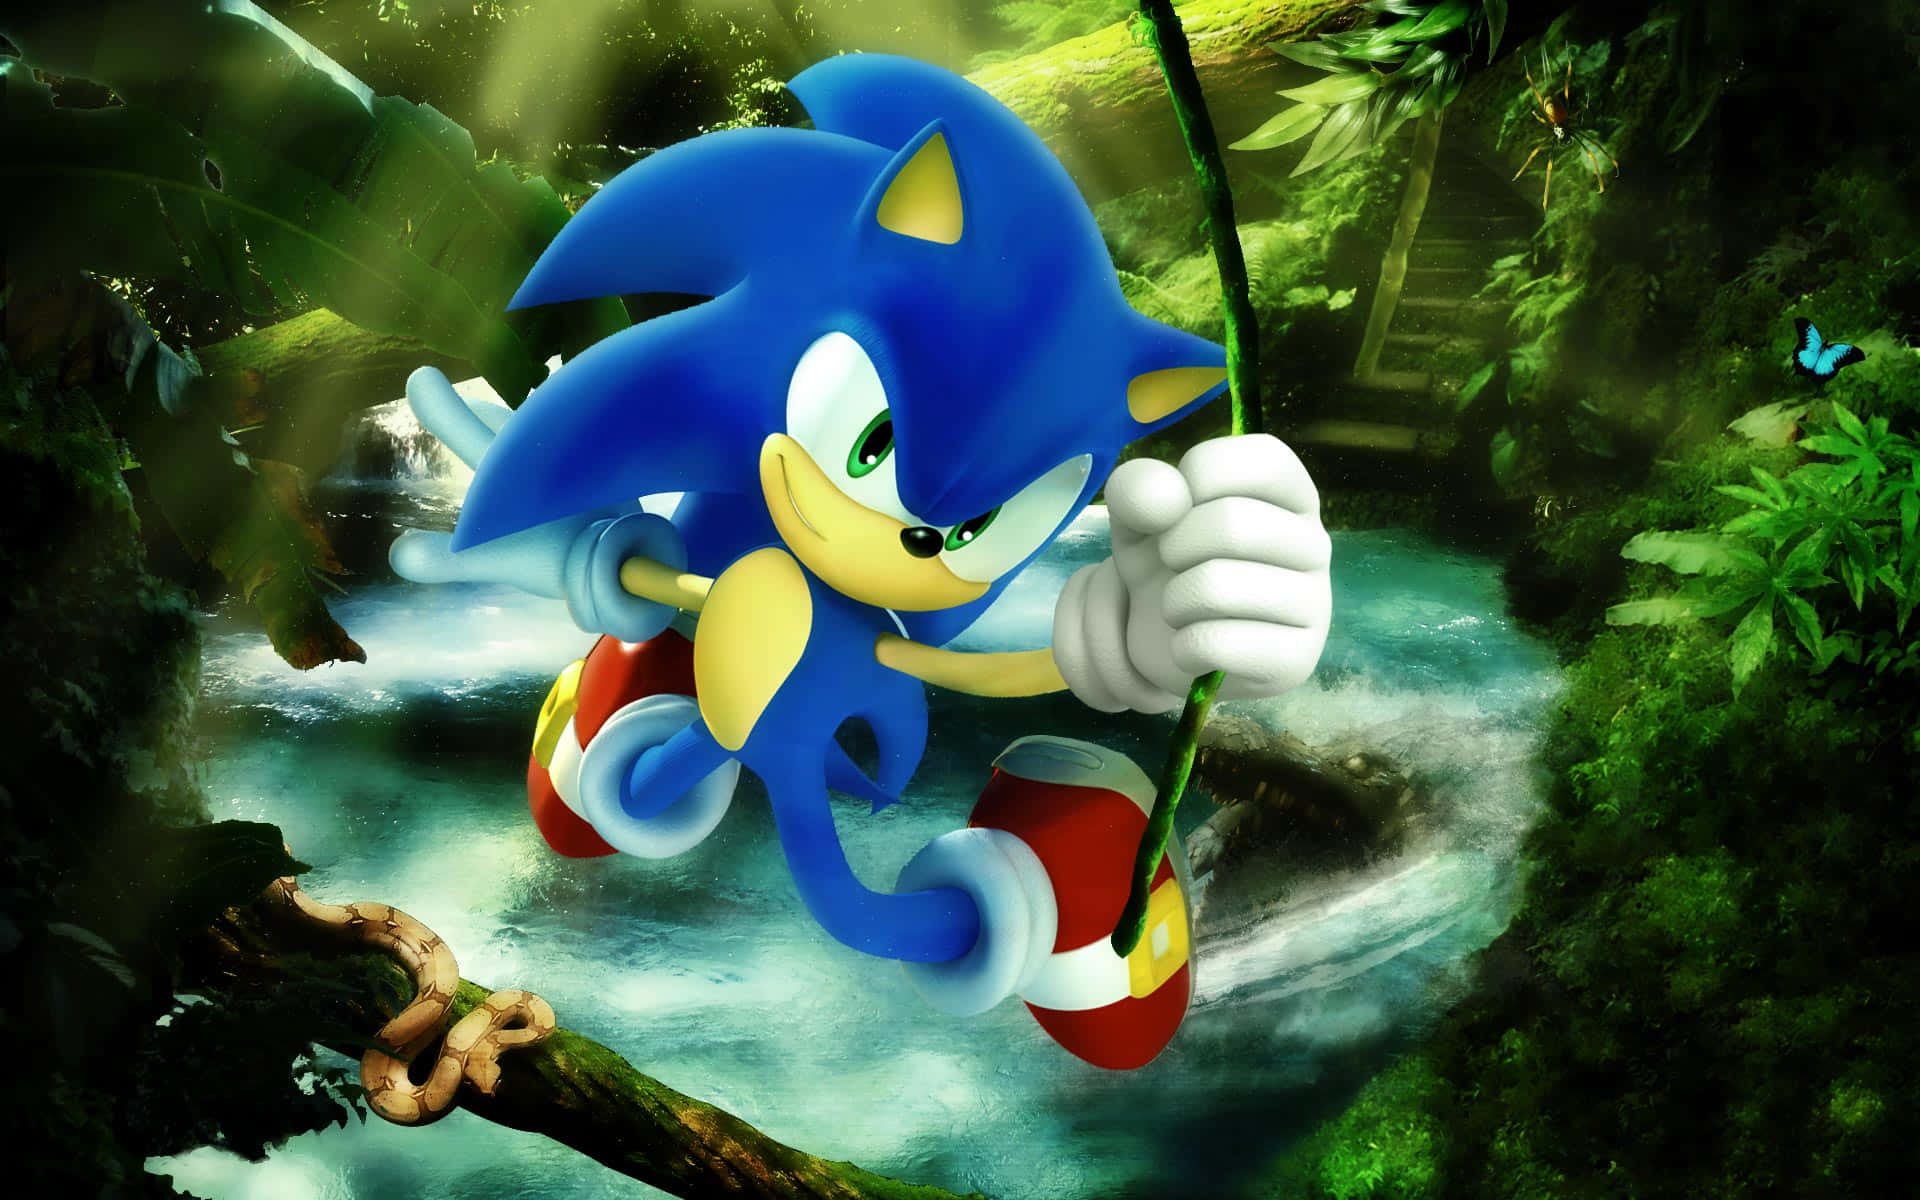 Sonic the Hedgehog racing through the magical world of the Secret Rings Wallpaper